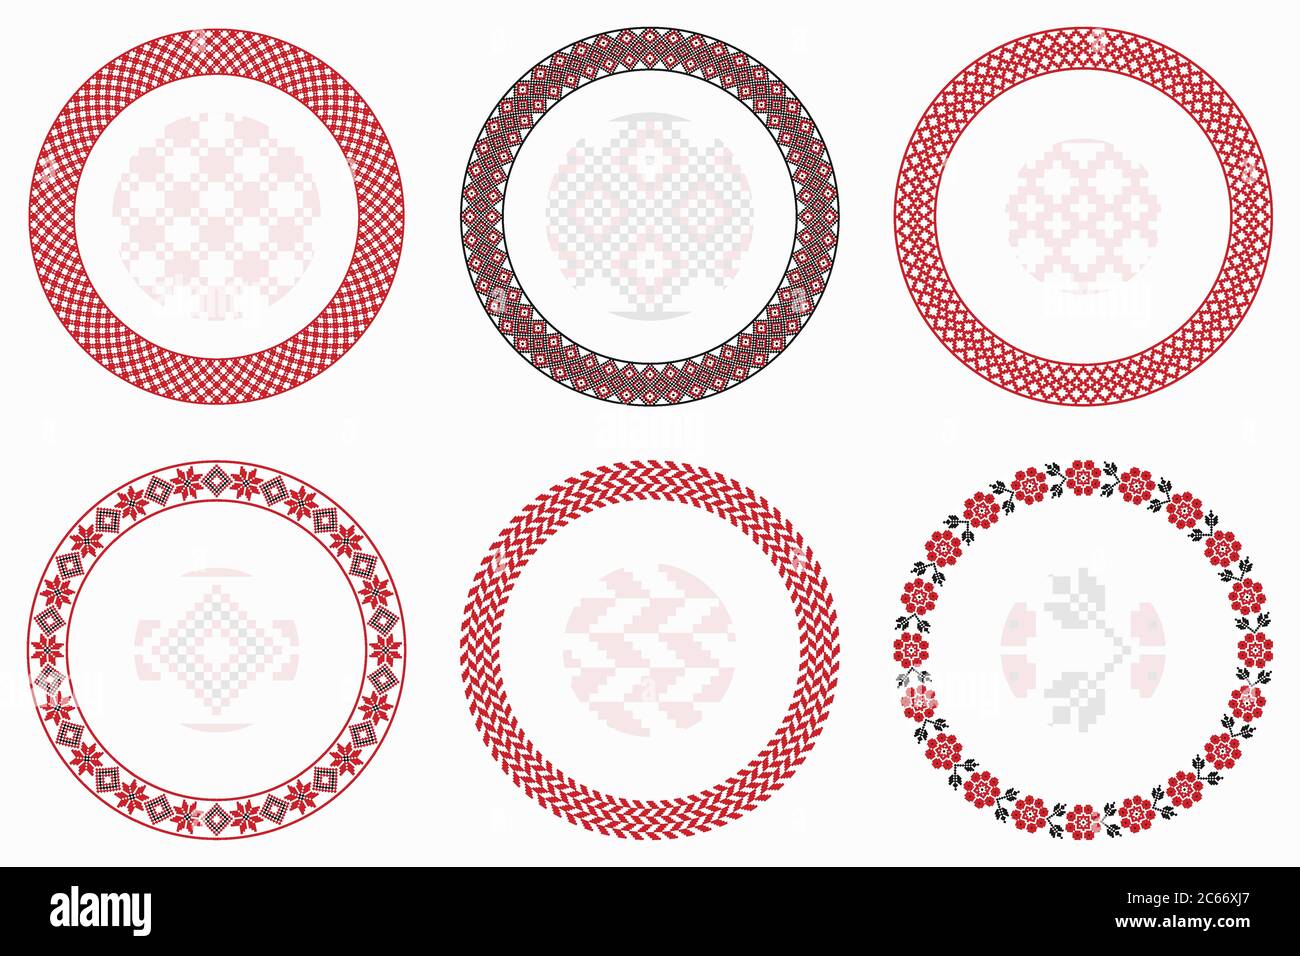 Slavic geometric round patterns set. Borders, frames. Vector illustration of round Slavic embroidery ornament elements with seamless pattern brushes Stock Vector